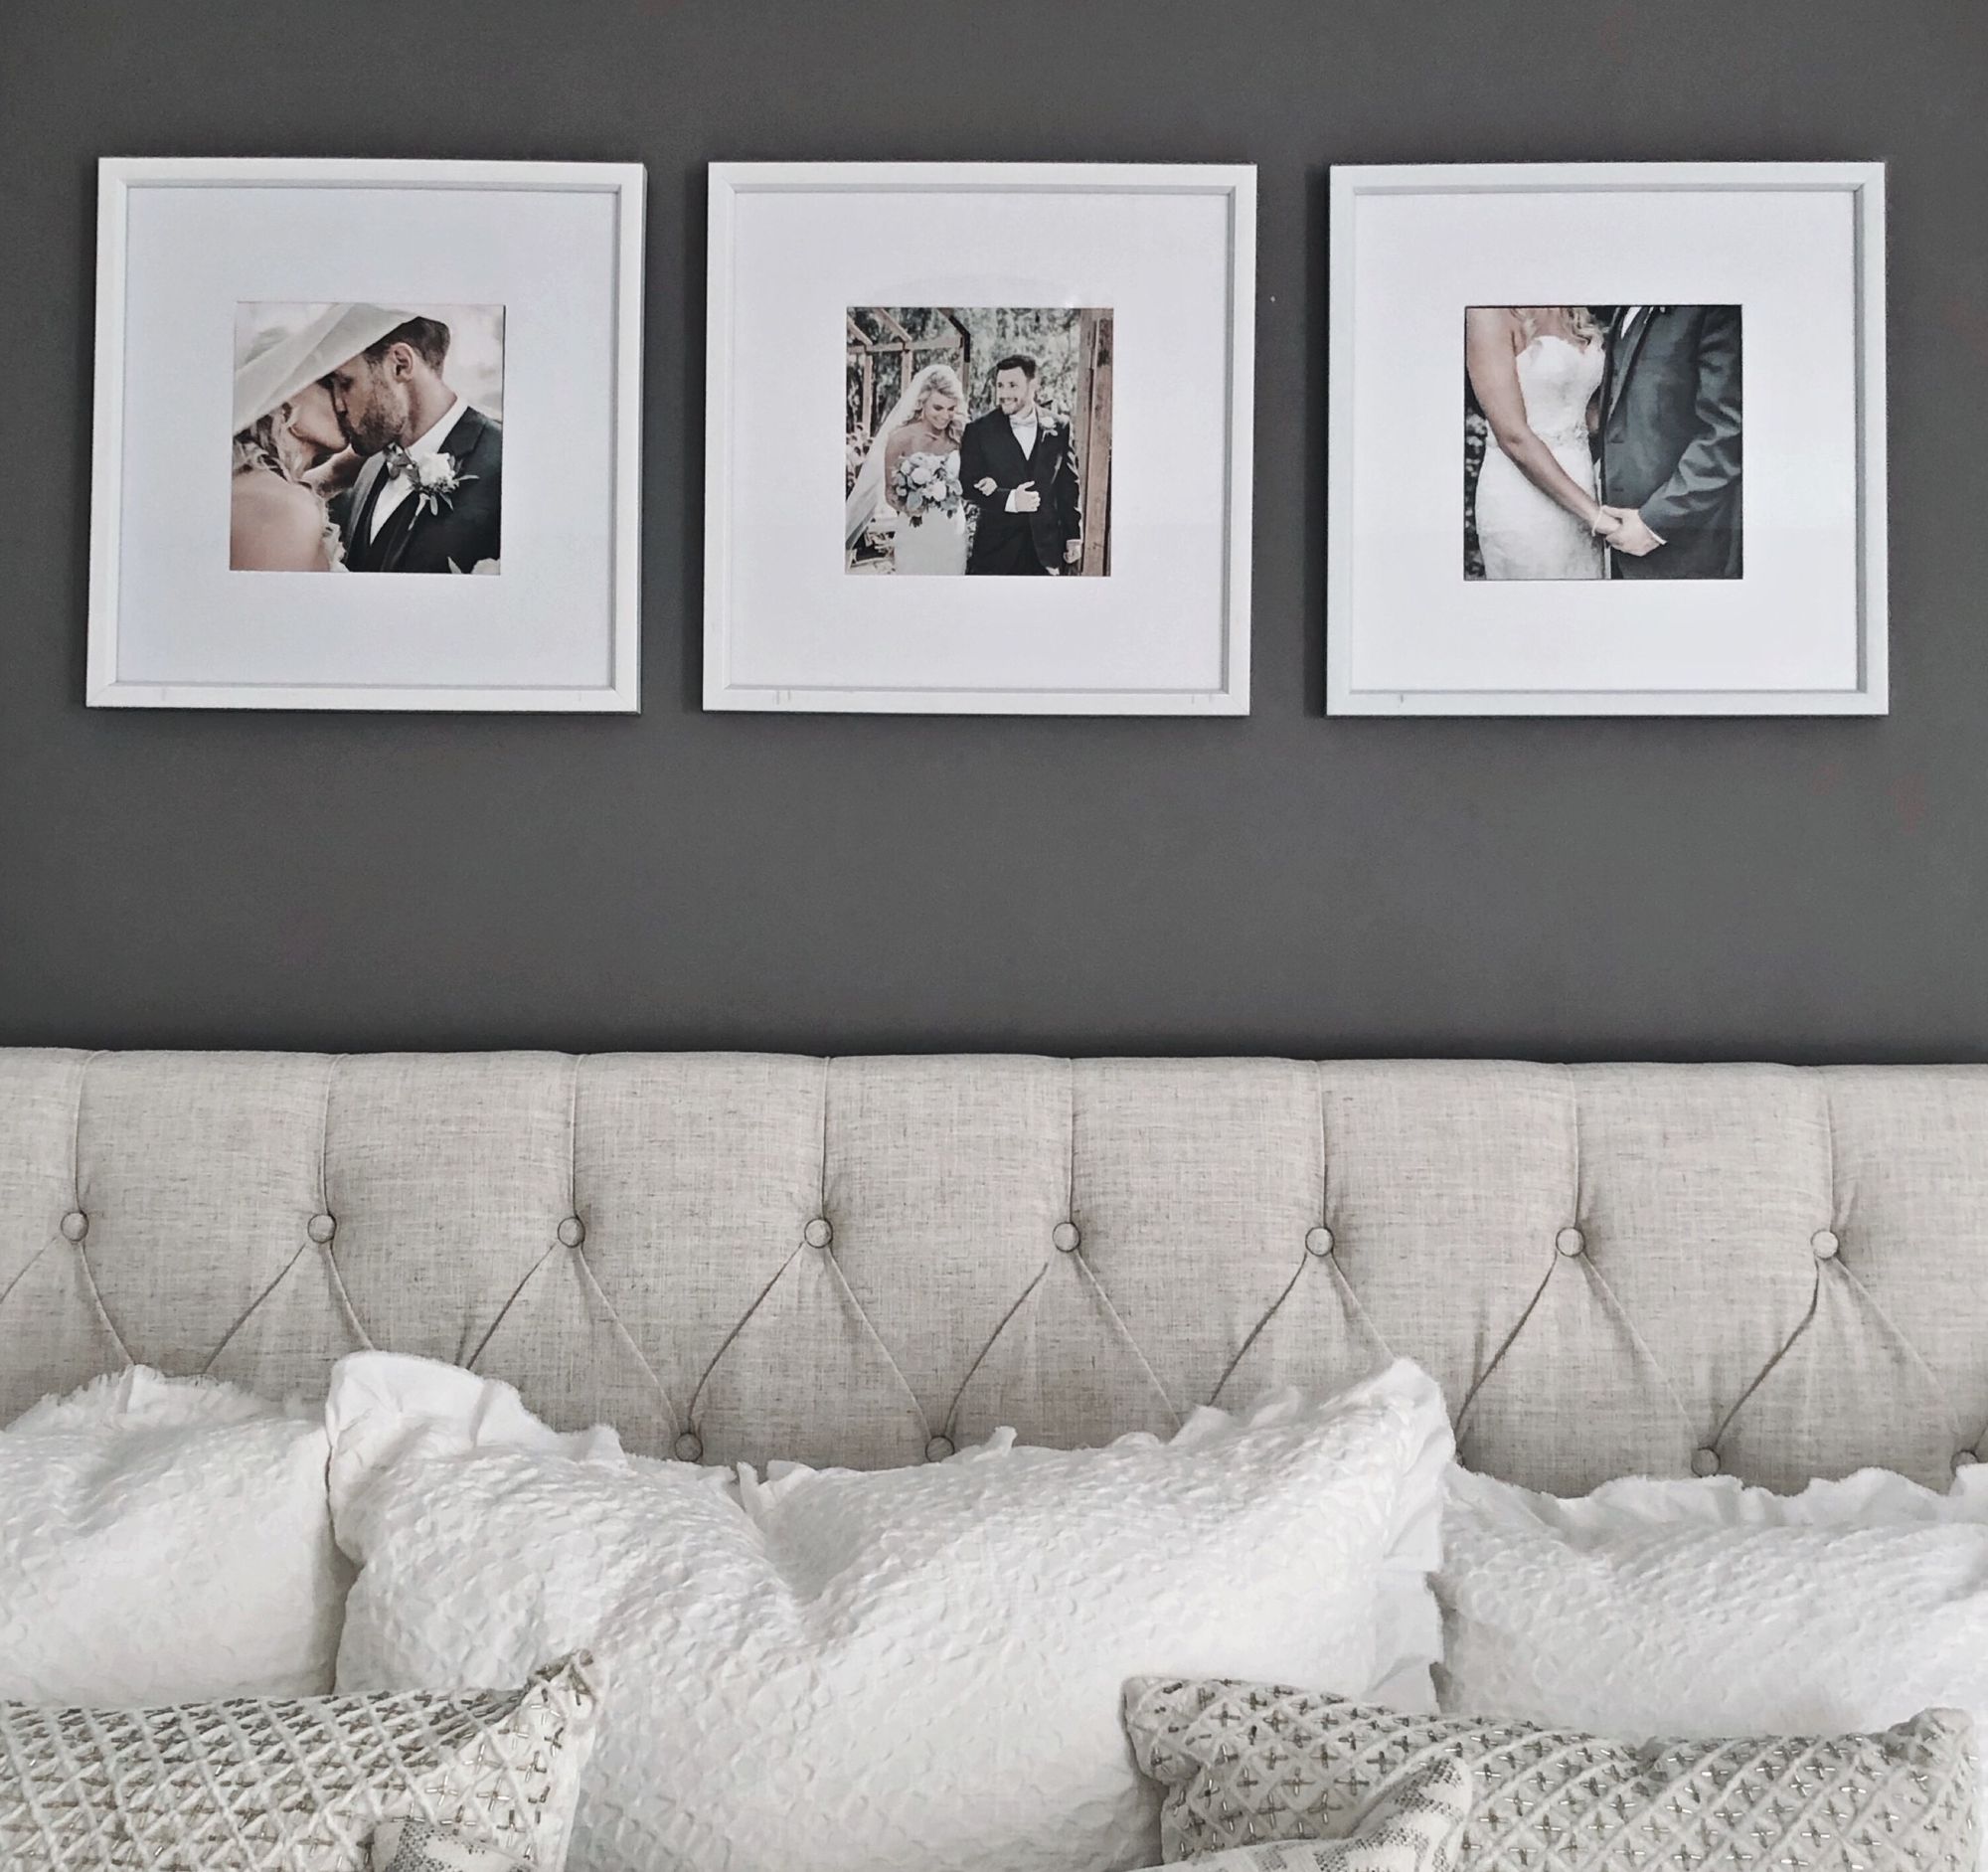 Gallery wall hack for when you have expensive taste, but an inexpensive budget